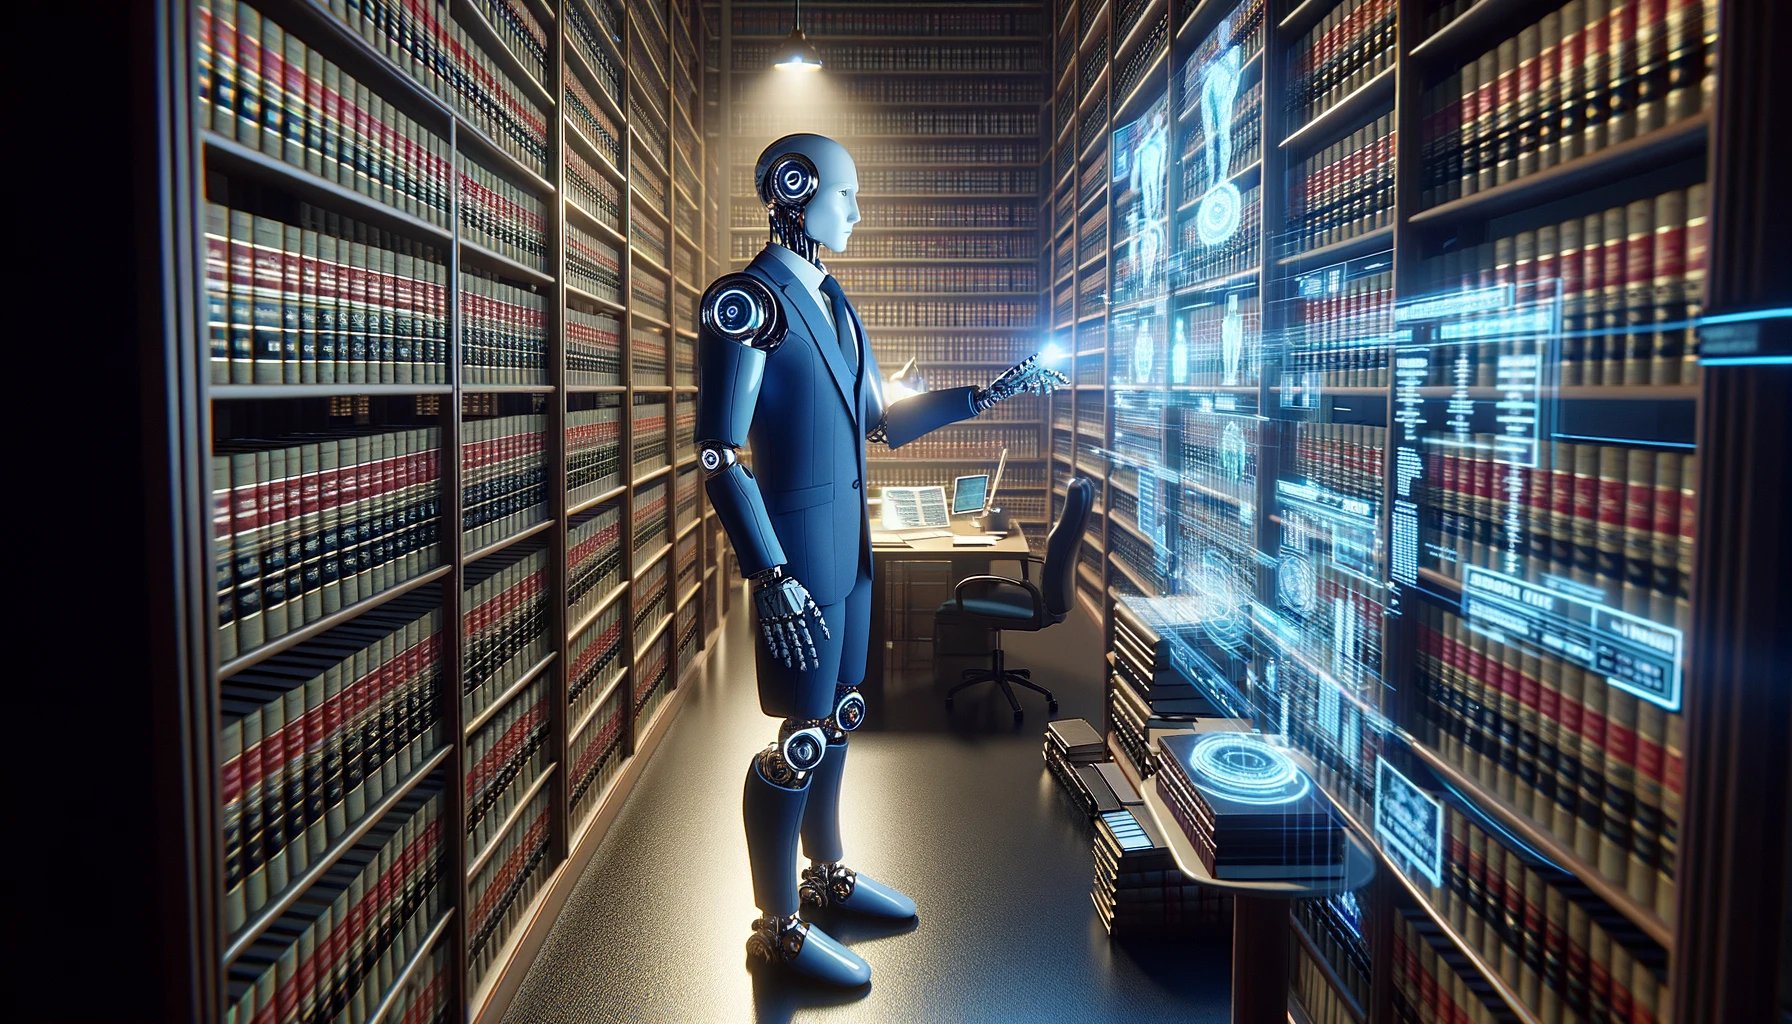 DALL·E 2024-03-23 02.40.27 - Imagine a scenario where a highly advanced AI legal consultant, visualized as a humanoid robot, is deeply involved in legal research within a law firm